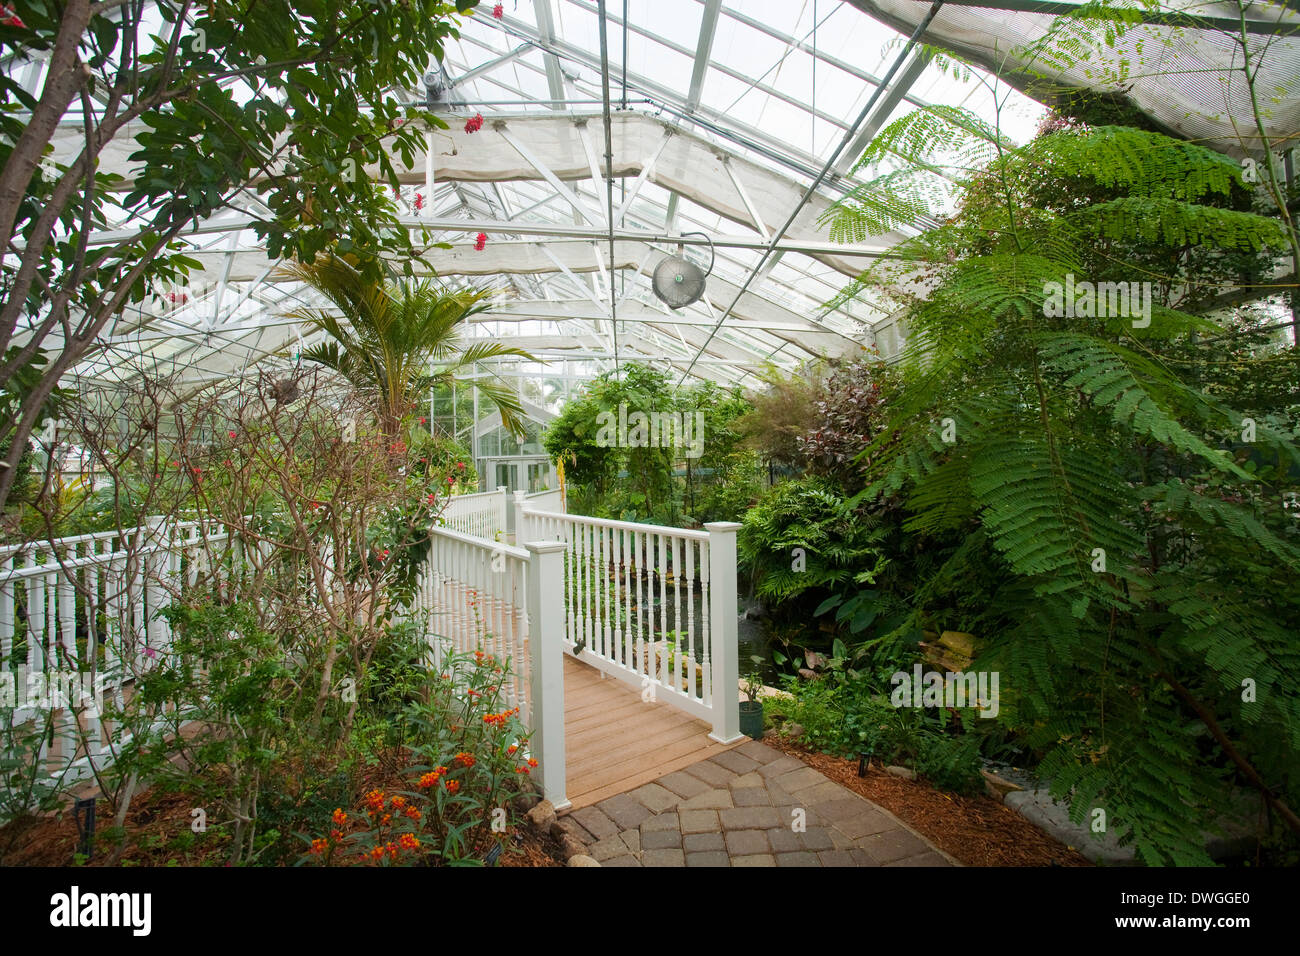 THE BUTTERFLY ESTATES, a glass conservatory for butterflies, Fort Myers, Florida, USA. Stock Photo